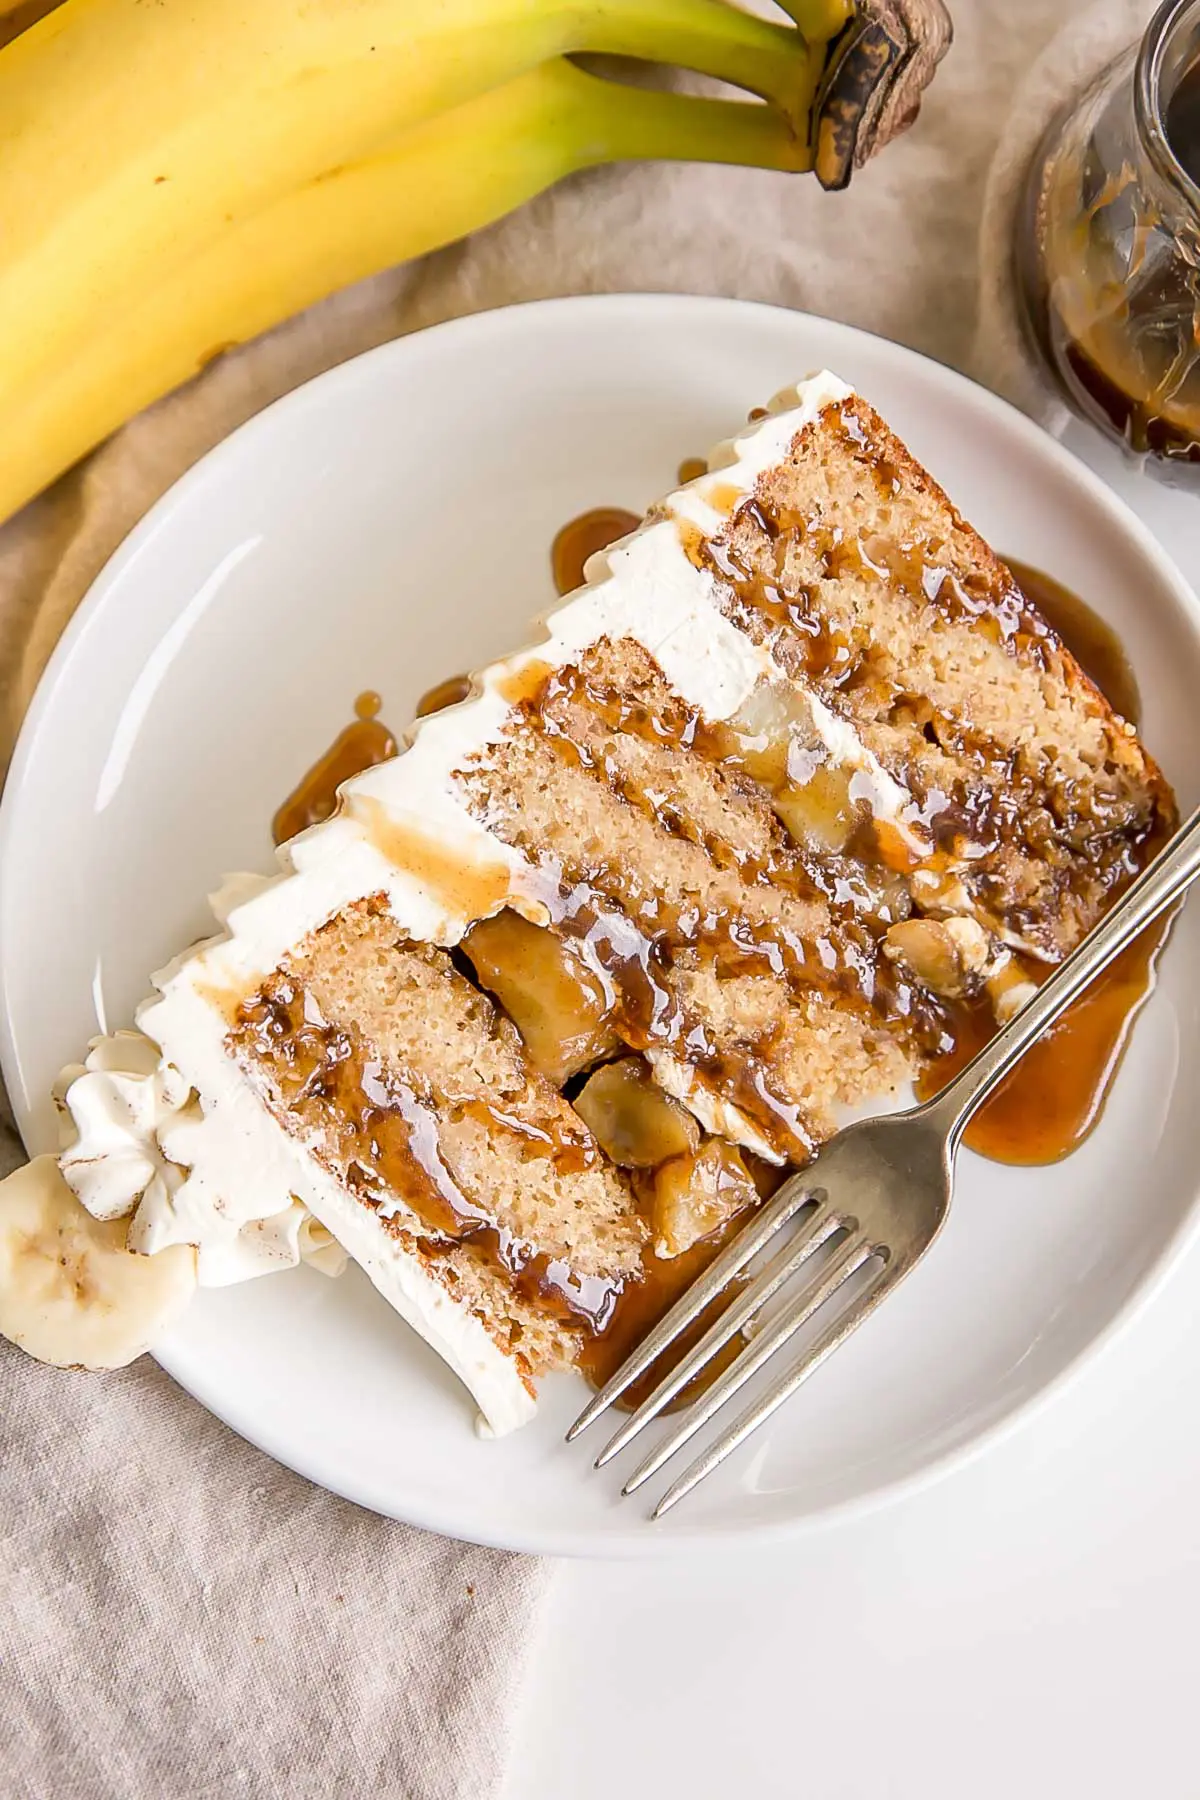 Slice of Bananas Foster Cake on a plate drizzled with Fosters sauce.